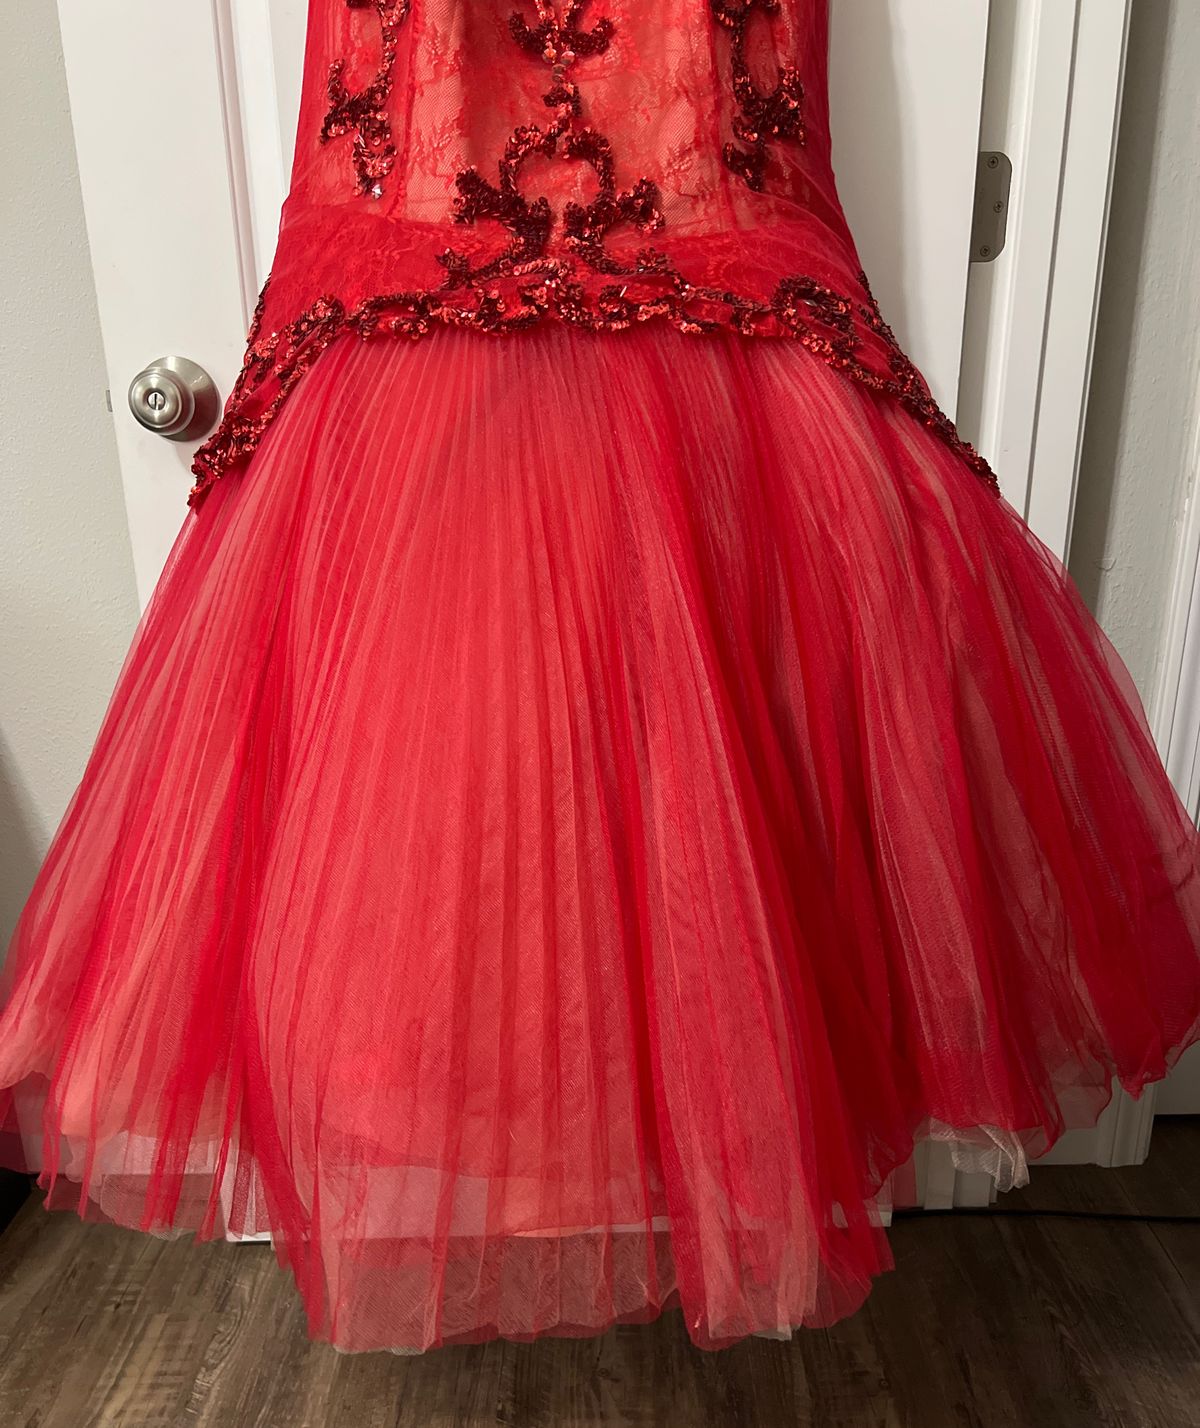 Sherri Hill Plus Size 16 Prom Strapless Red Mermaid Dress on Queenly